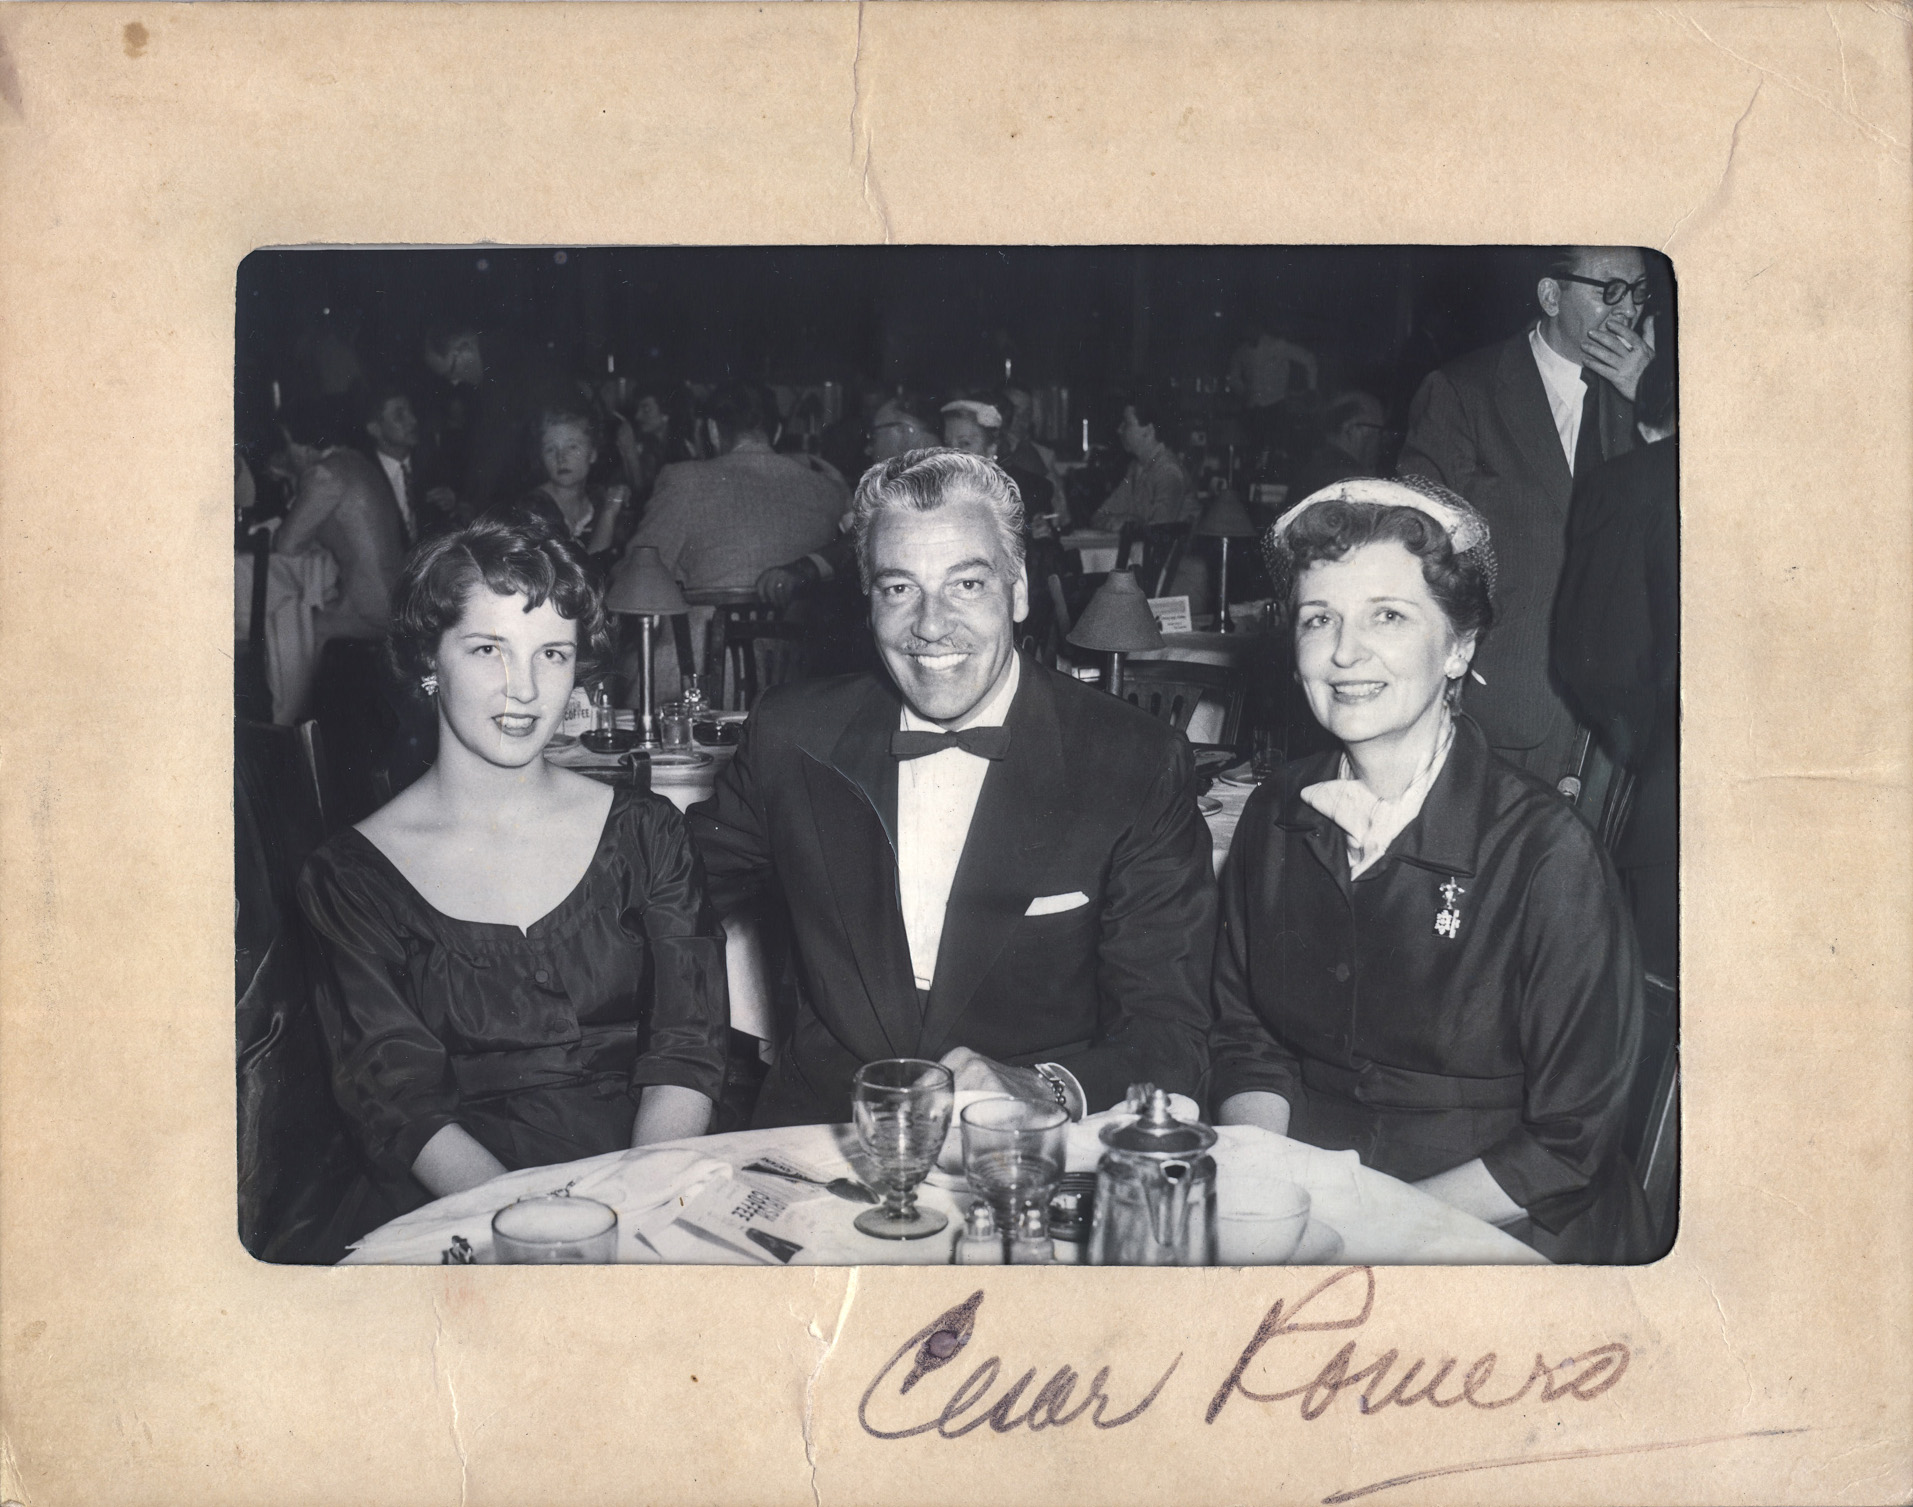 My mother, grandmother and Cesar Romero; San Francisco, CA 1956.

I'm assuming this was taken during brunch based on the mode of dress, table setting and menu offerings.

My grandmother was active in the arts and social circles of San Francisco during this time; I wish I had more of her photos available, I'm sure there were some great photo ops. View full size.